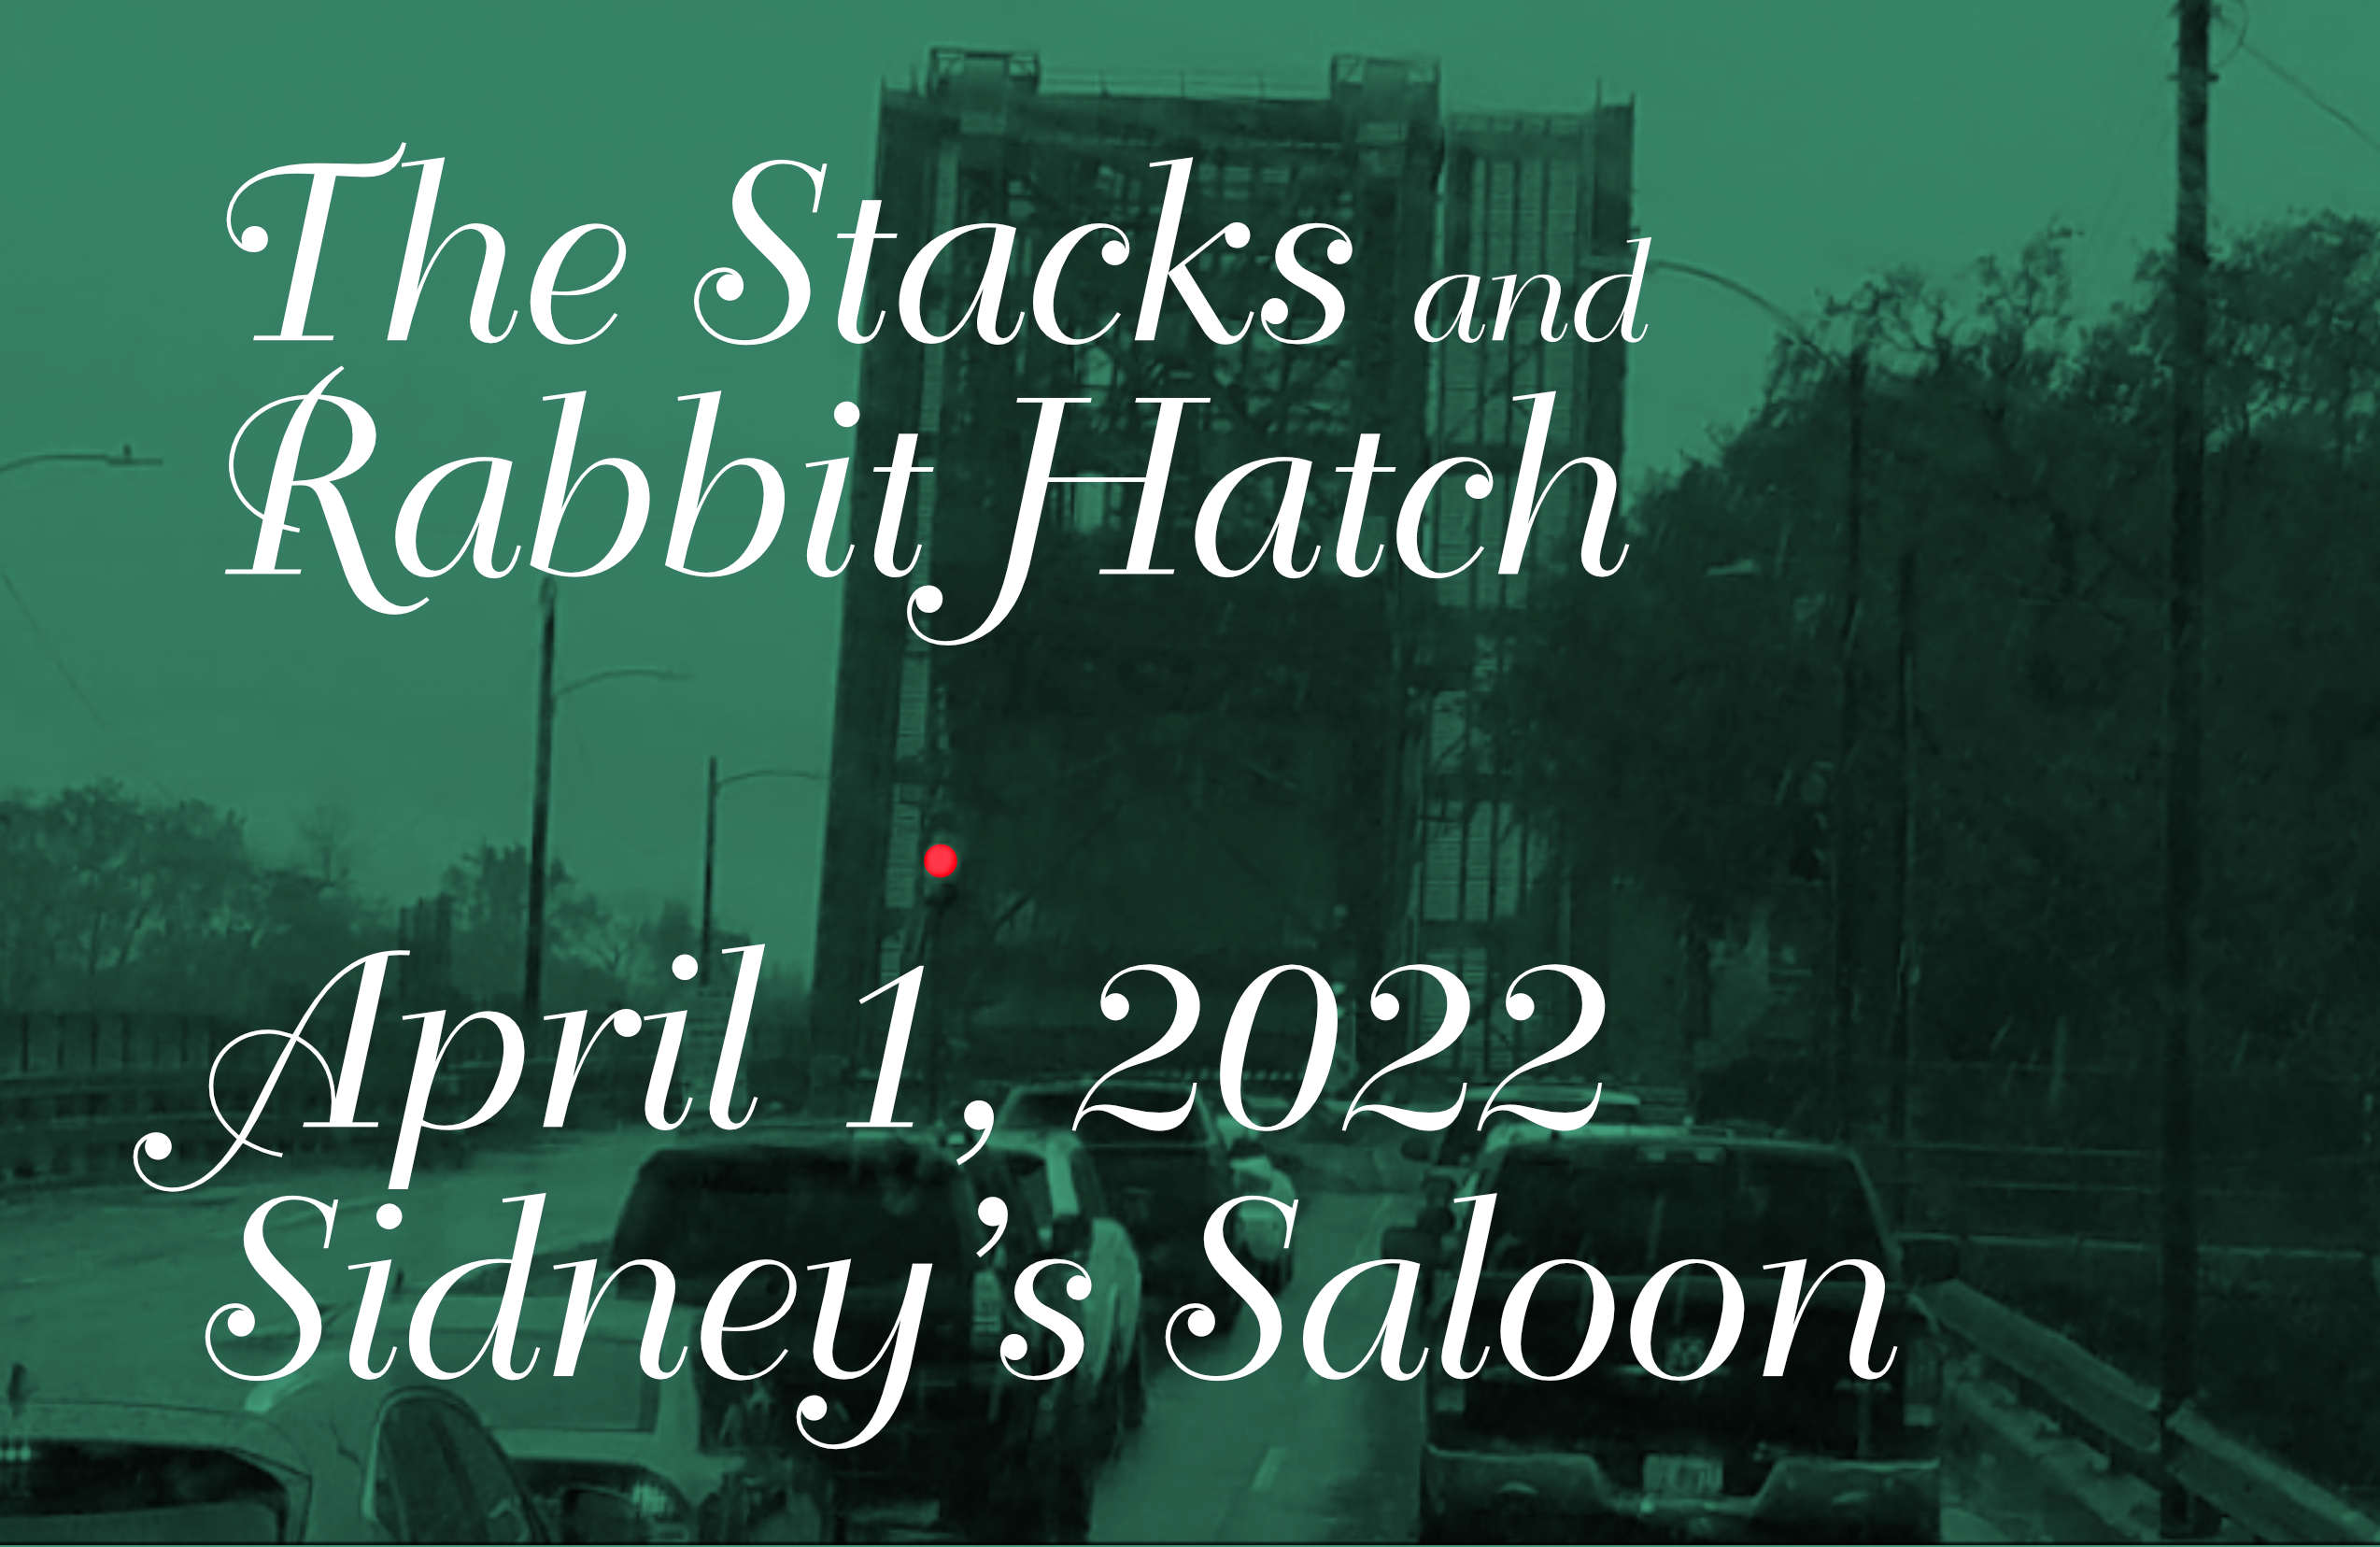 The Stacks play Sidney's Saloon April 1, 2022 with Rabbit Hatch.